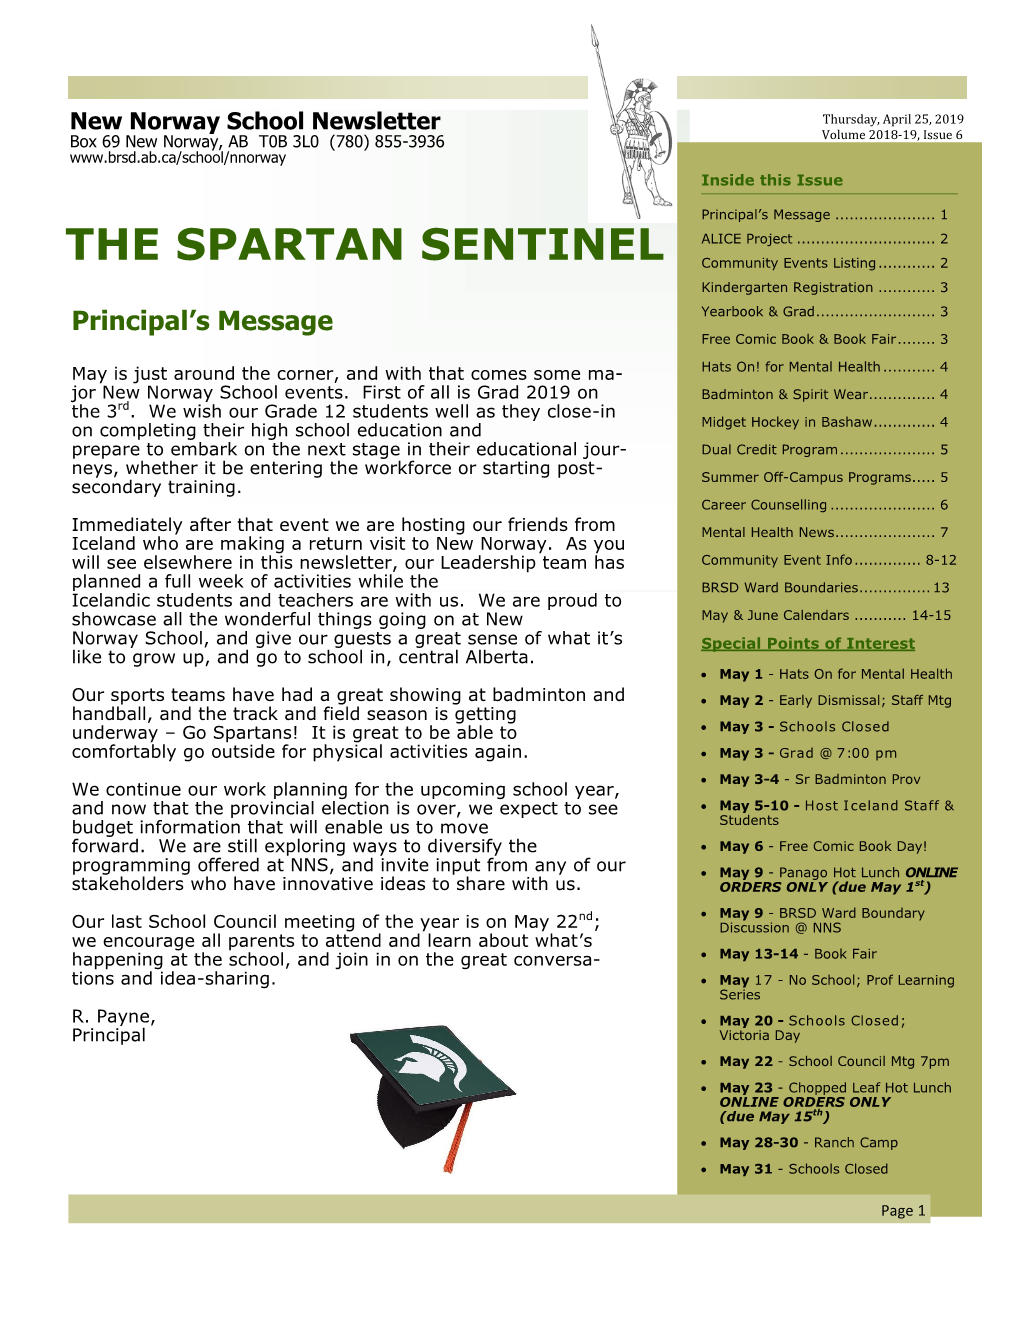 THE SPARTAN SENTINEL Community Events Listing